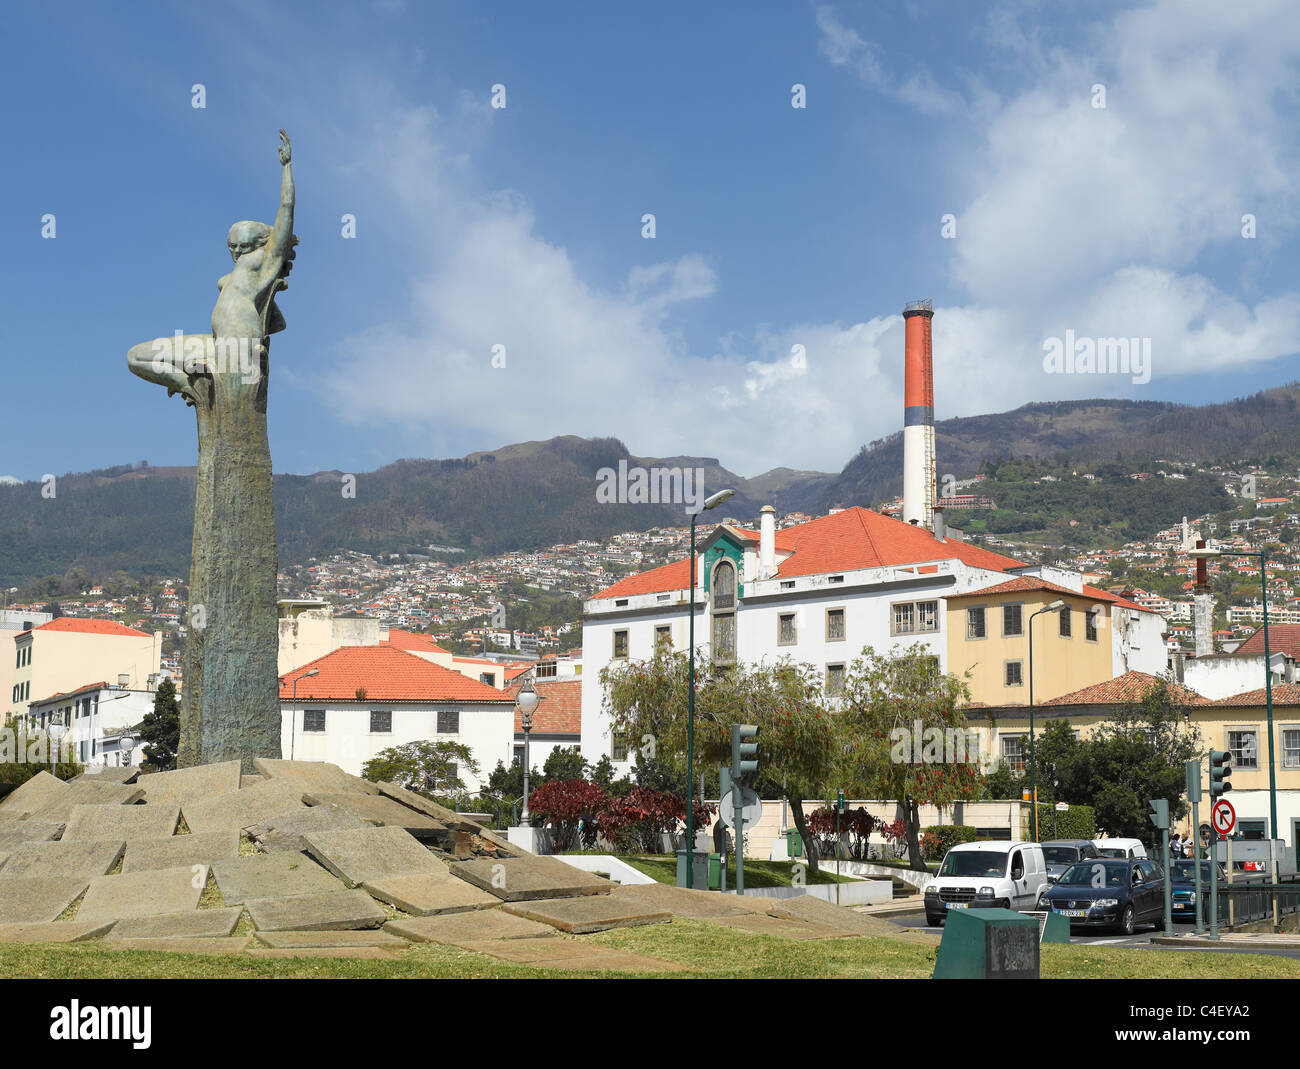 Statue on roundabout at Avenide do Mar Funchal Madeira Portugal EU Europe Stock Photo